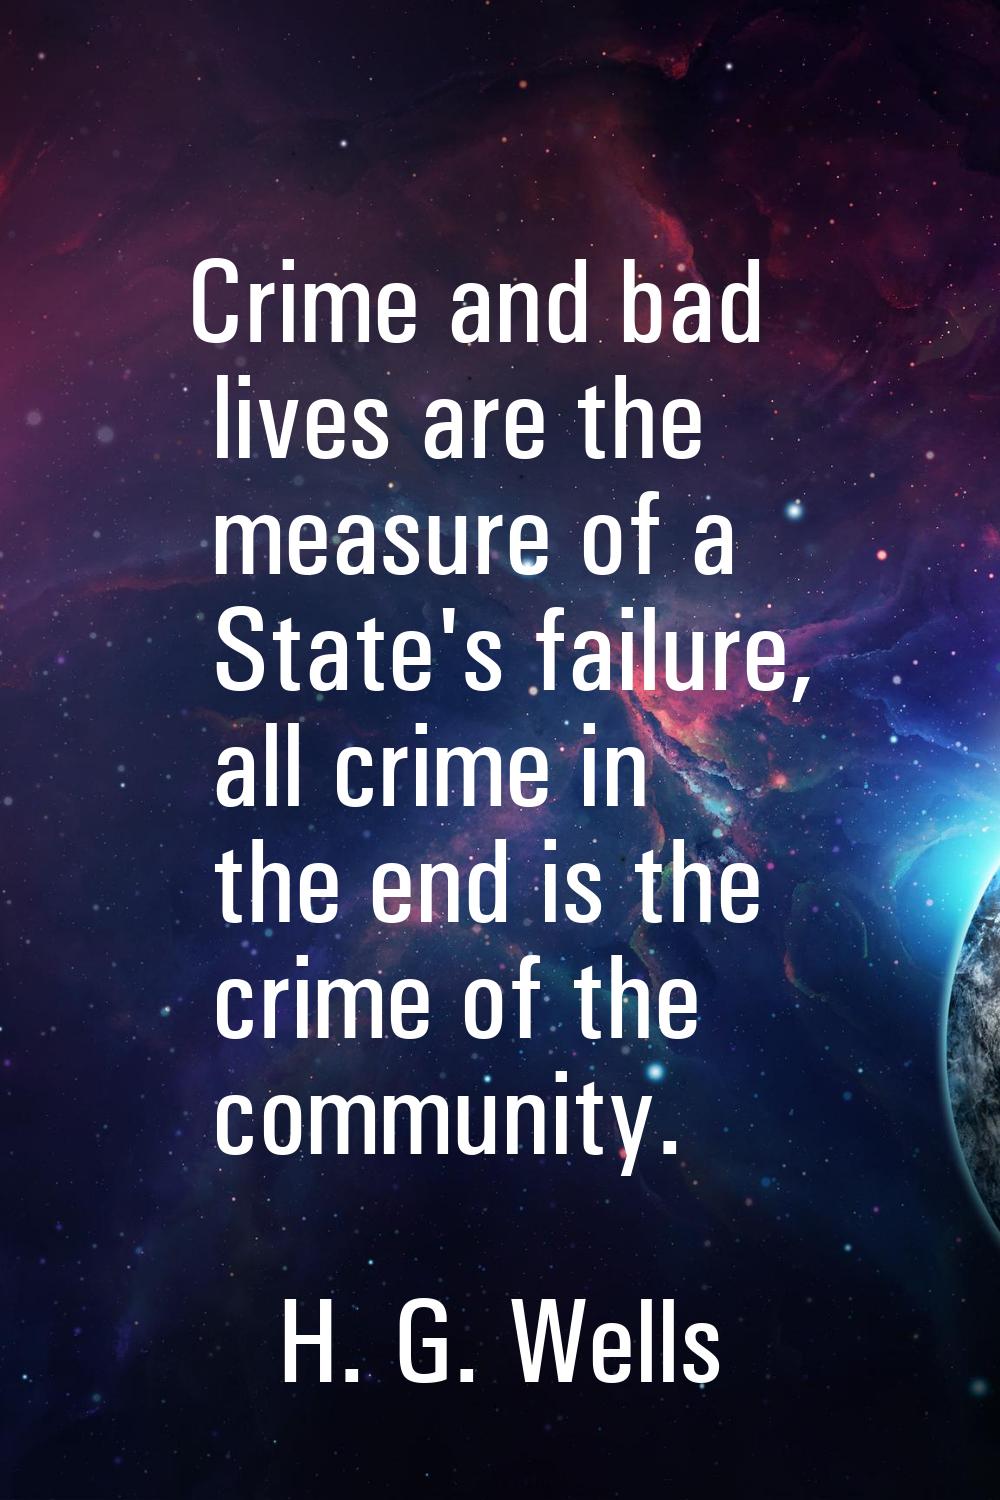 Crime and bad lives are the measure of a State's failure, all crime in the end is the crime of the 